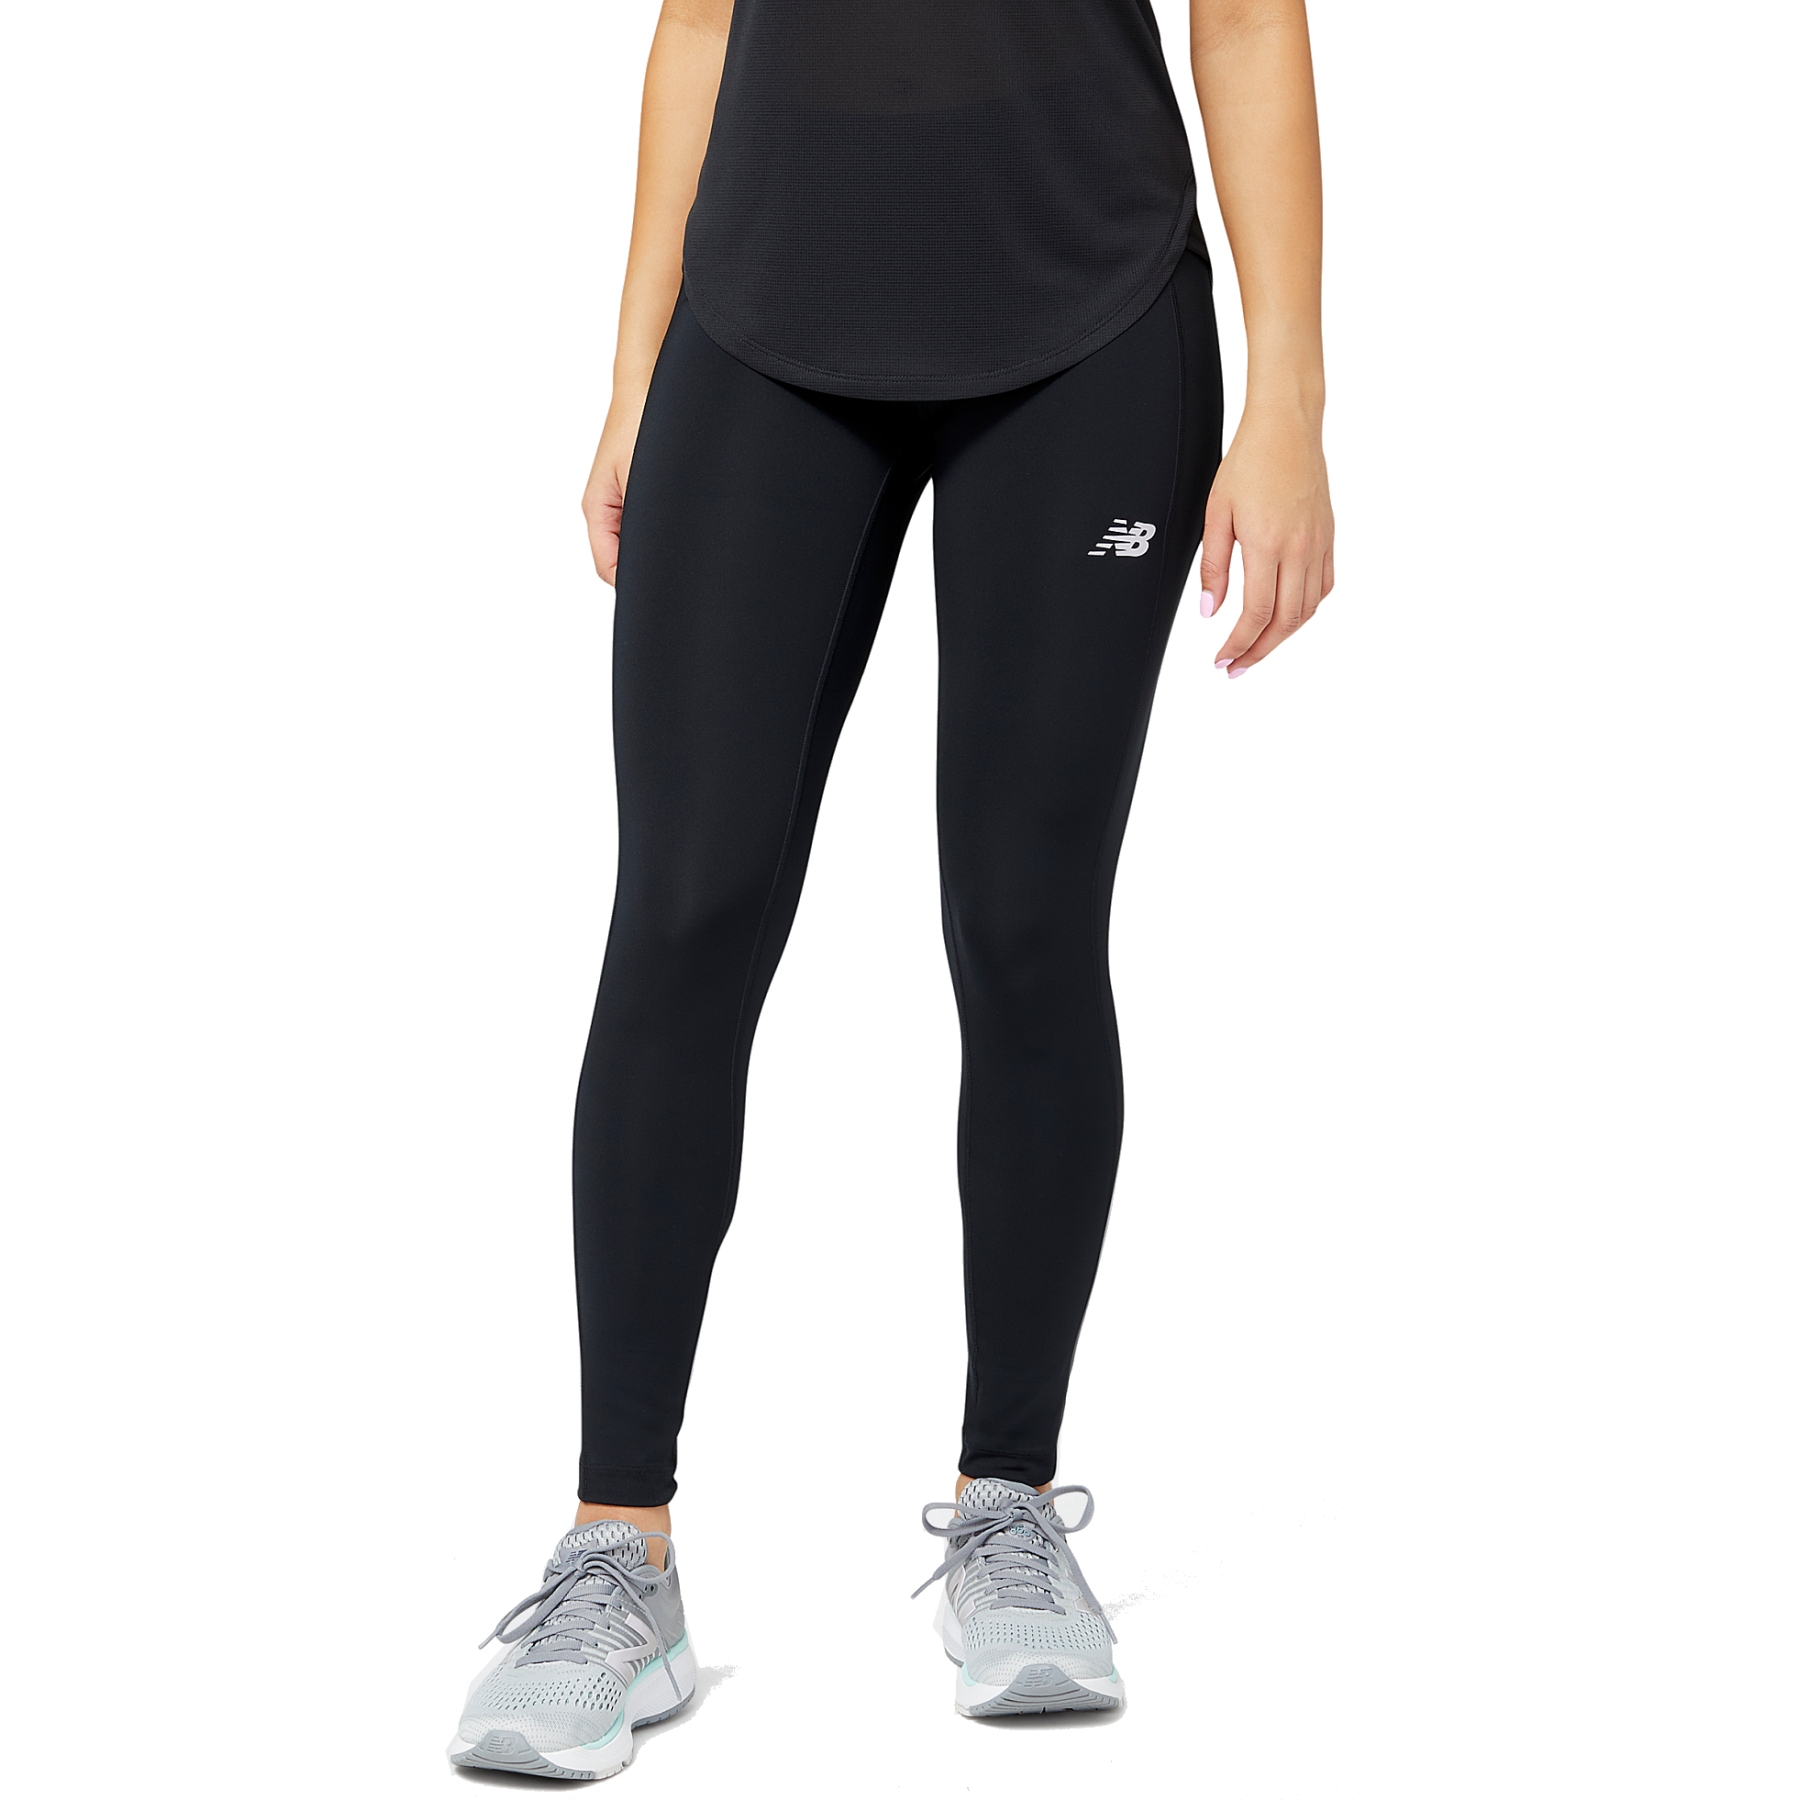 New Balance Accelerate Womens Running Tights - Black